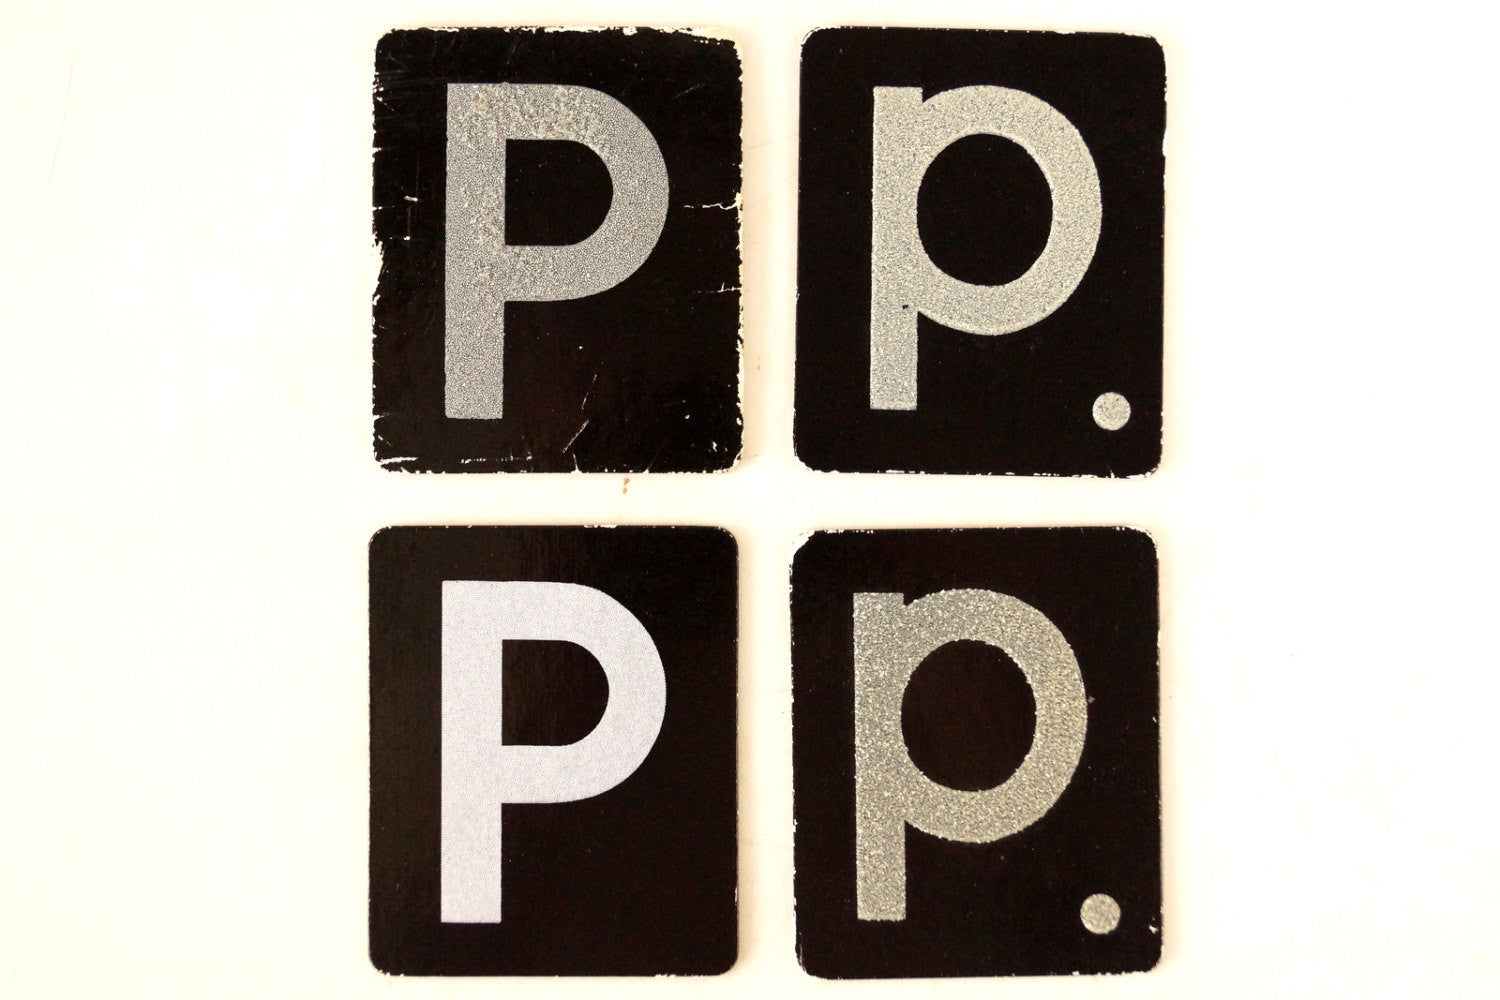 Vintage Alphabet Letter P Card with Textured Surface in Black and Wh –